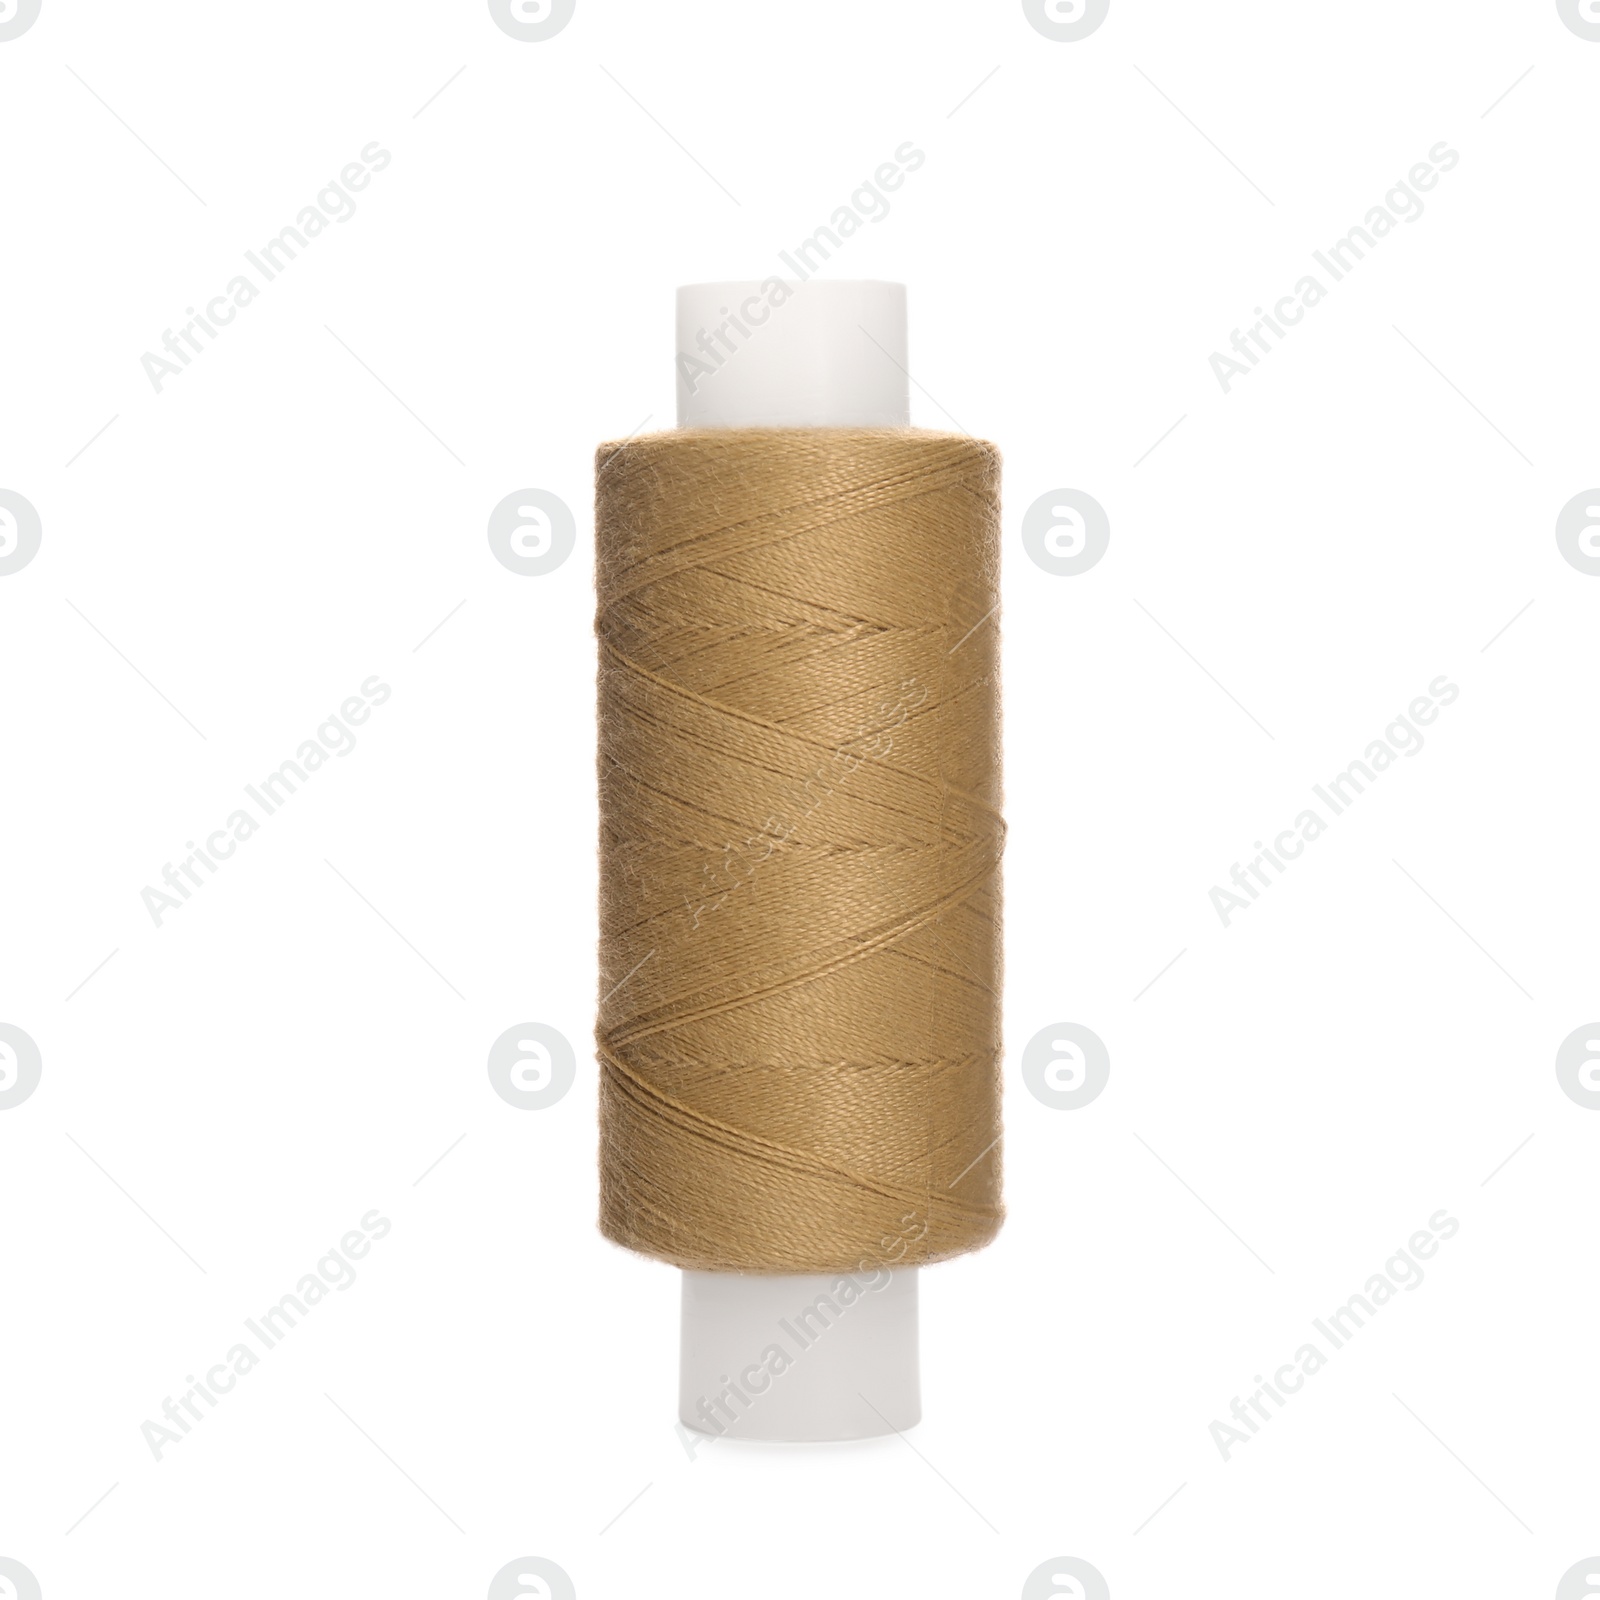 Photo of Spool of dark beige sewing thread isolated on white